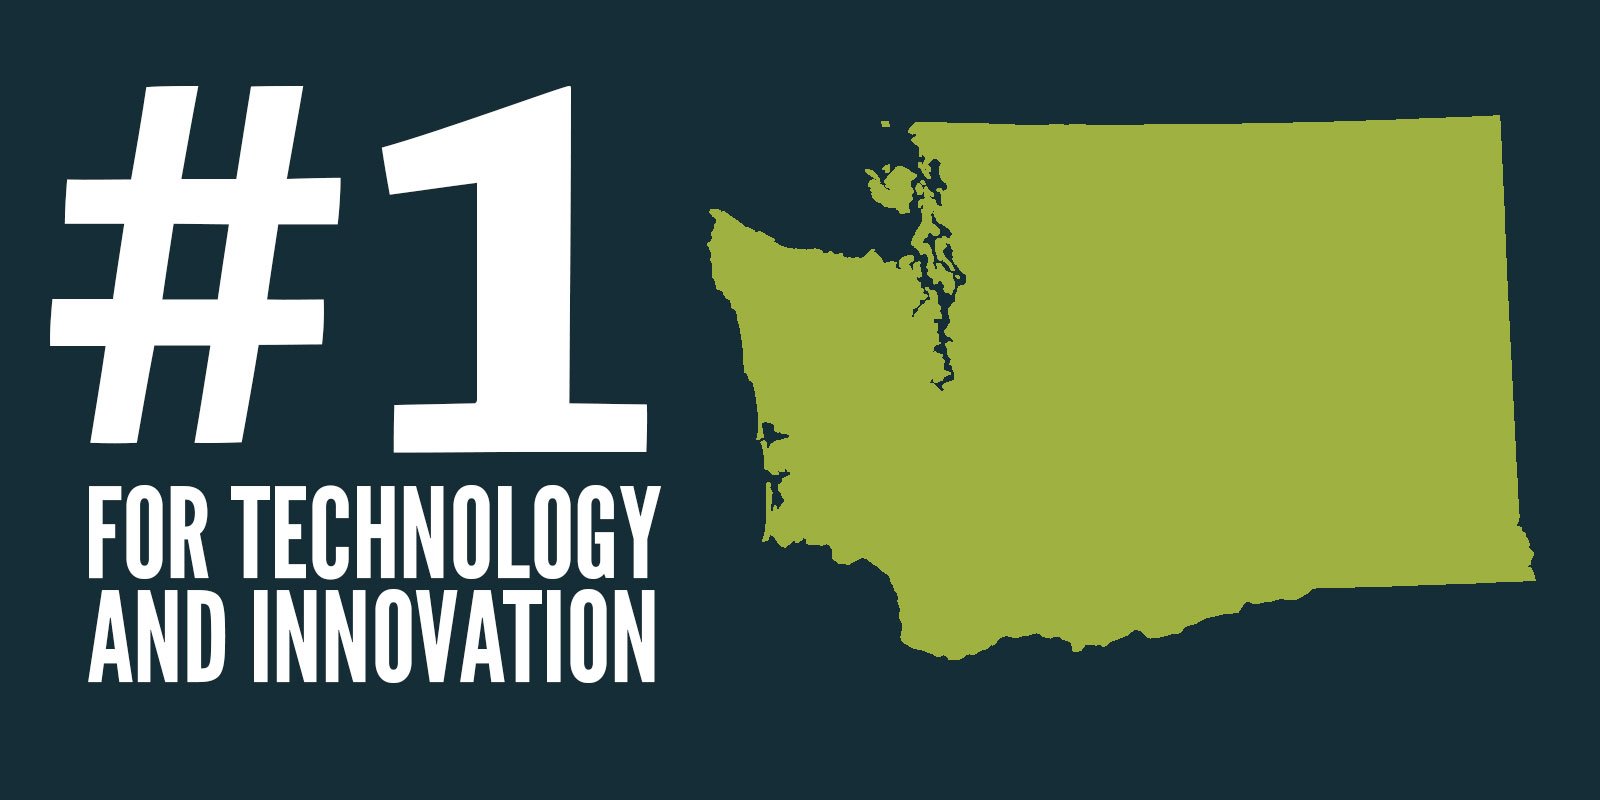 We’re #1 for Tech and Innovation in America’s Top States for Business 2016